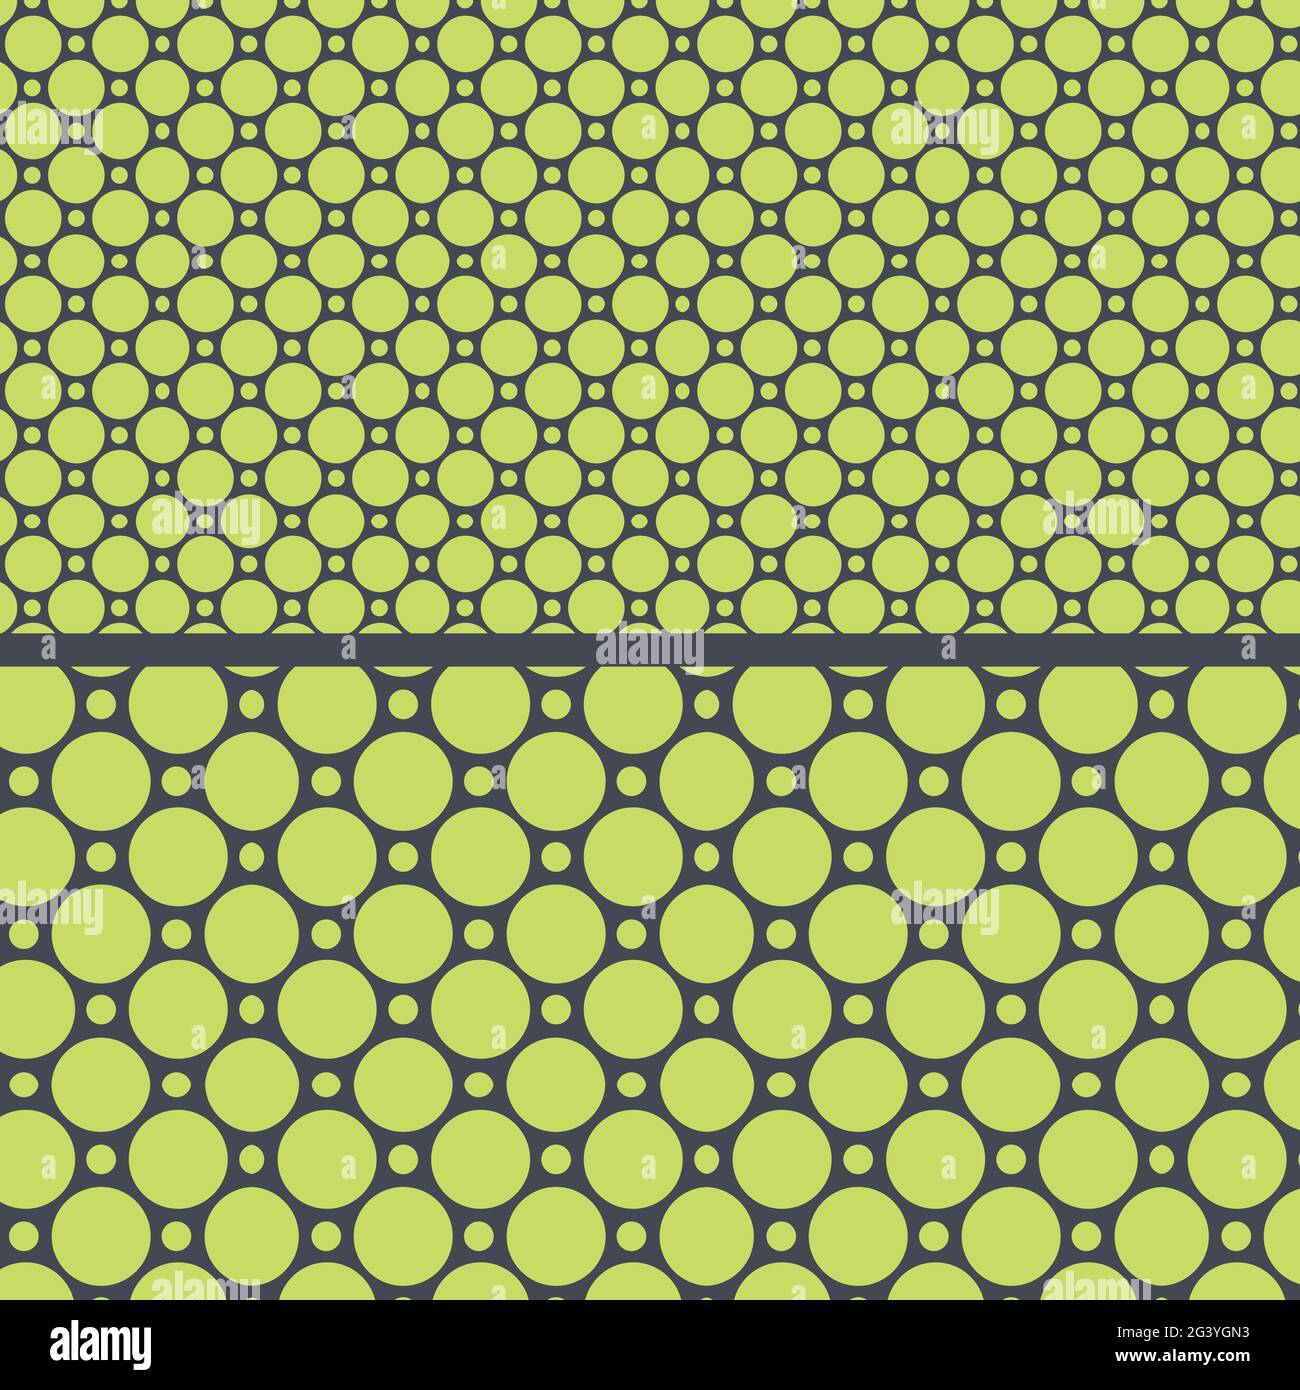 Seamless Abstract Simple Organic Pattern. Scalable Dots and Circles Pattern. Set of 2 Patterns made from Circle Shapes. Neon Green Background. Stock Vector